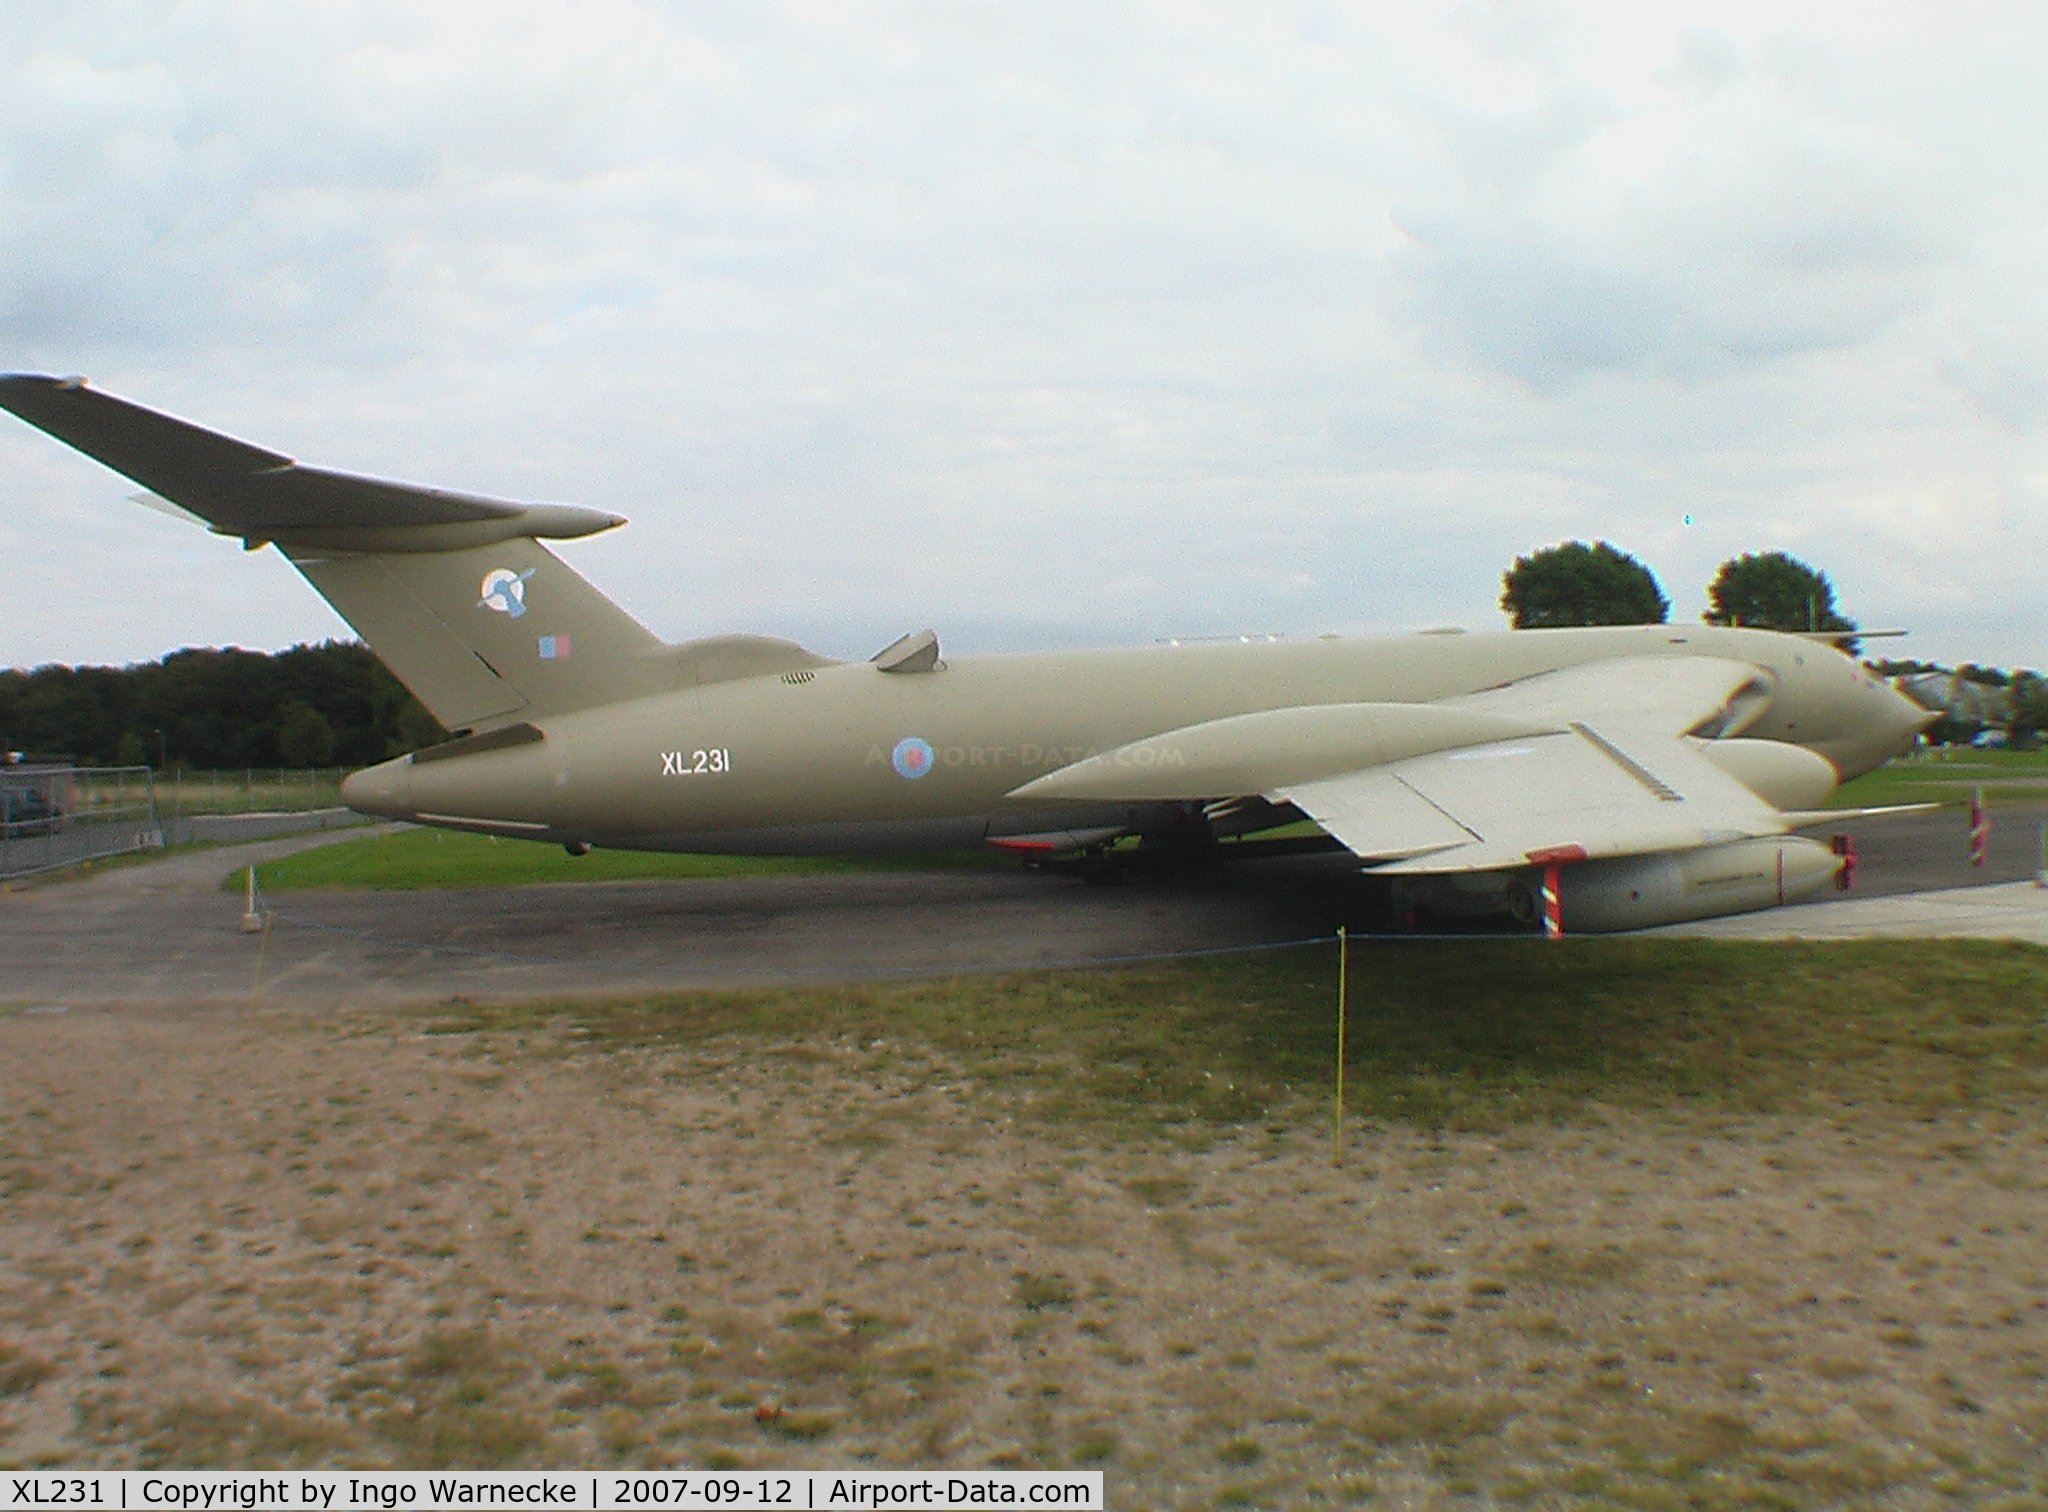 XL231, 1962 Handley Page Victor K.2 C/N HP80/76, Handley Page Victor K2 at the Yorkshire Air Museum, Elvington